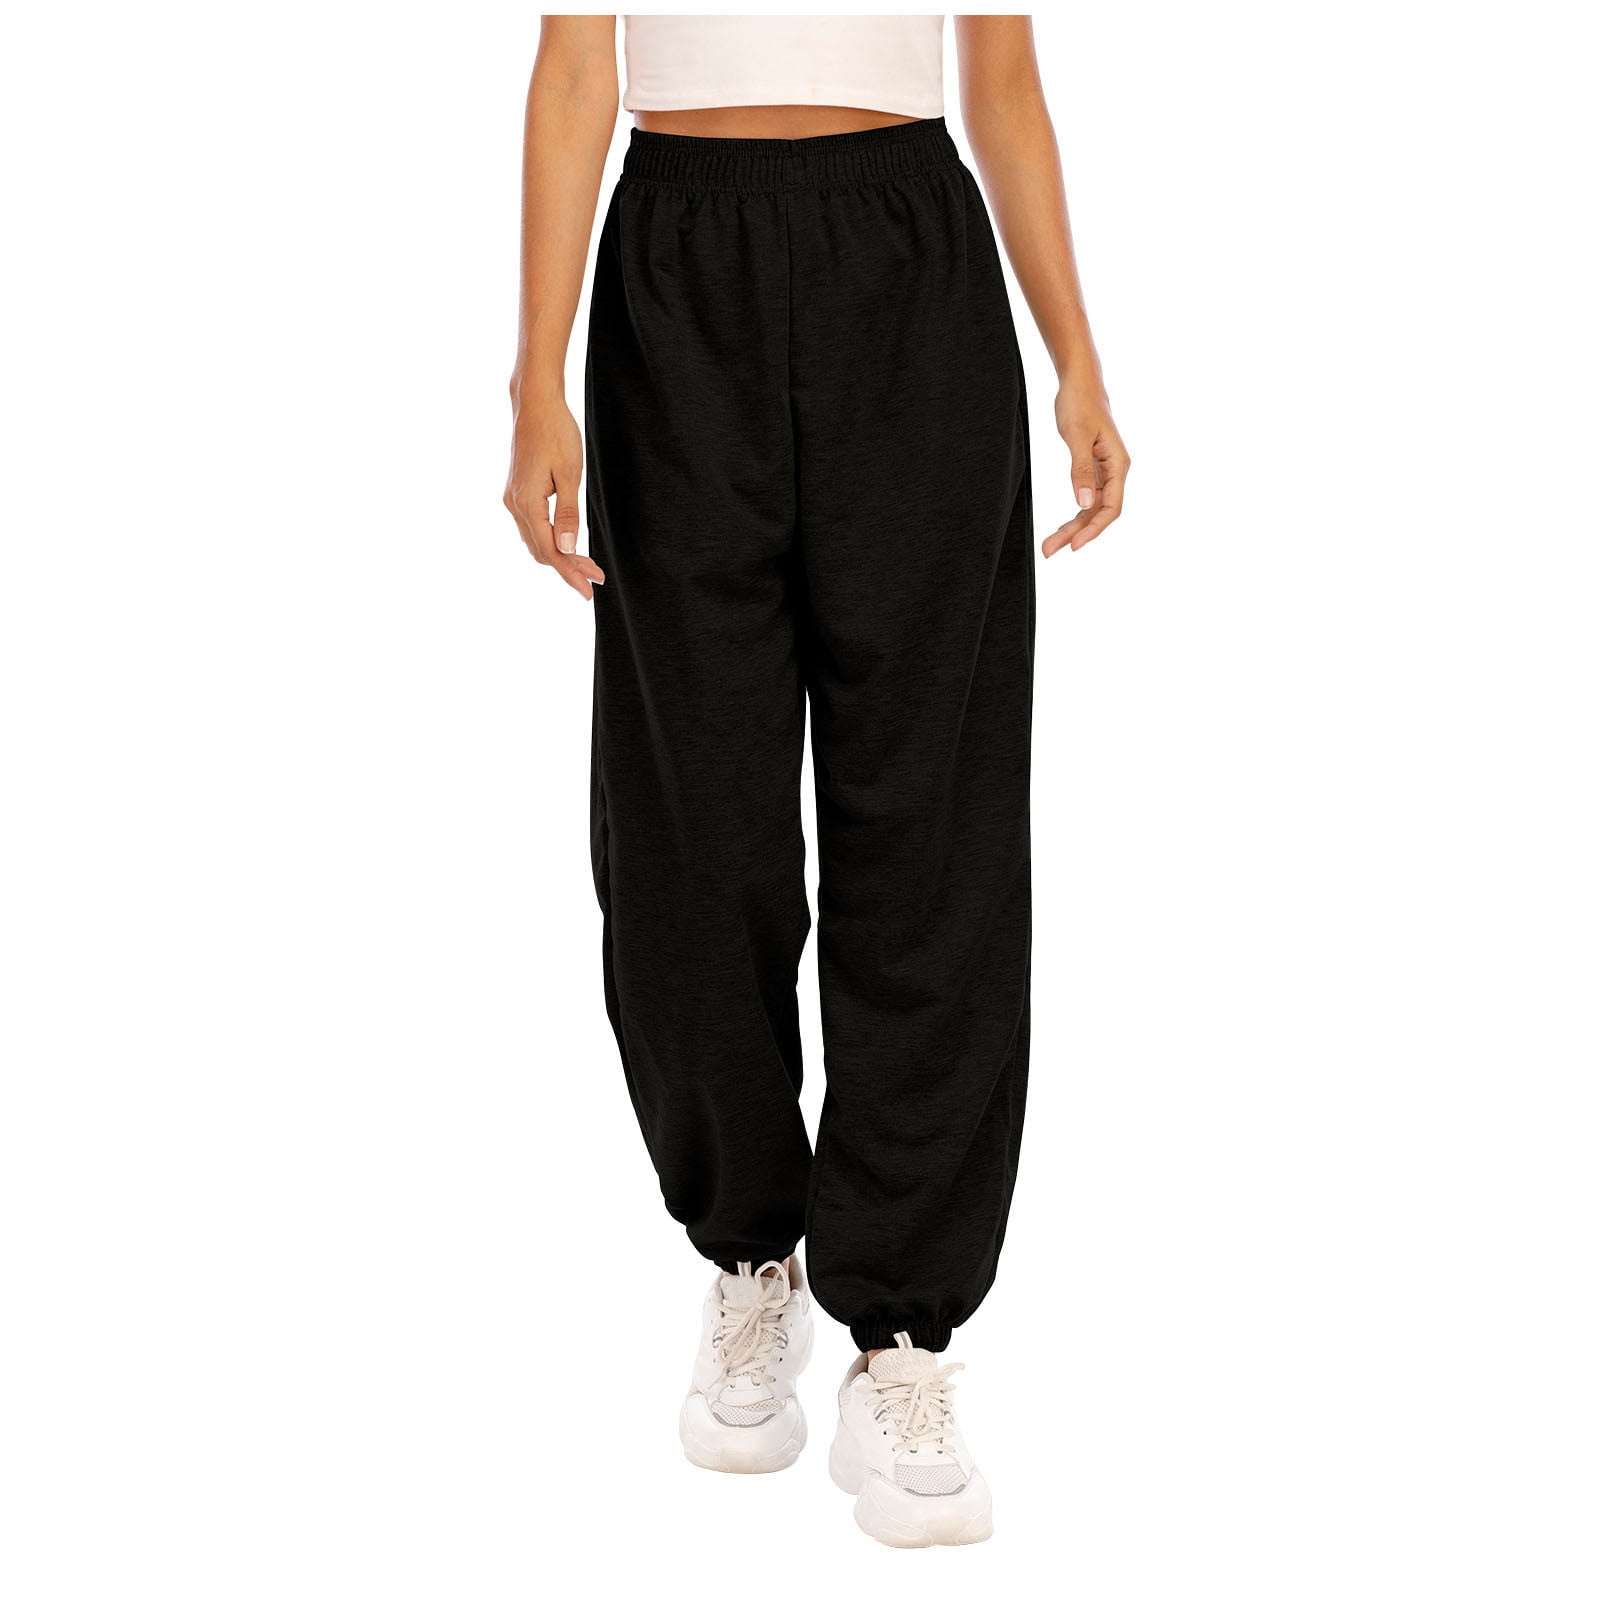 XFLWAM Women's Casual Baggy Sweatpants High Waisted Running Joggers Pants  Athletic Trousers with Pockets Drawstring Track Pants Black S 